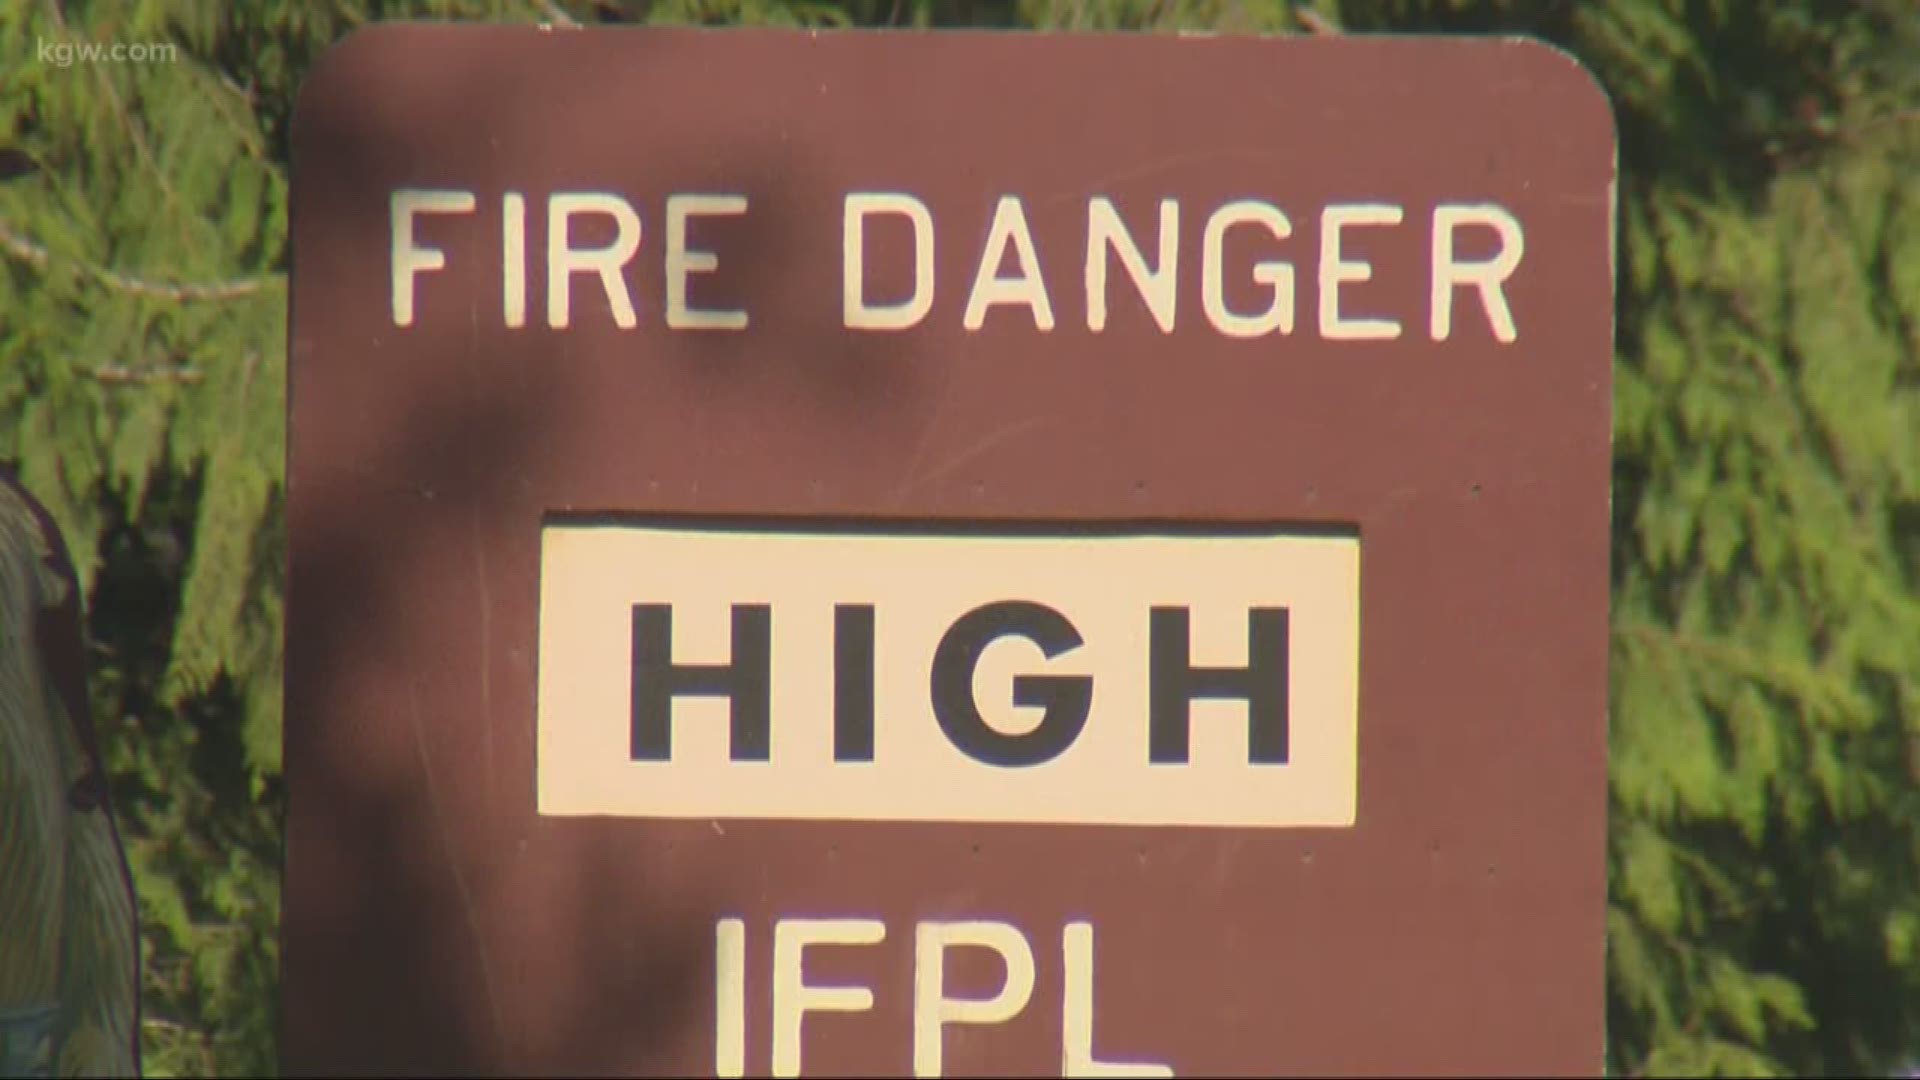 Ahead of Labor Day weekend, US Forest Service rangers are reminding people to be careful with campfires. KGW photojournalist Ken McCormick went up to the Mount Hood National Forest to get a less on fire safety.